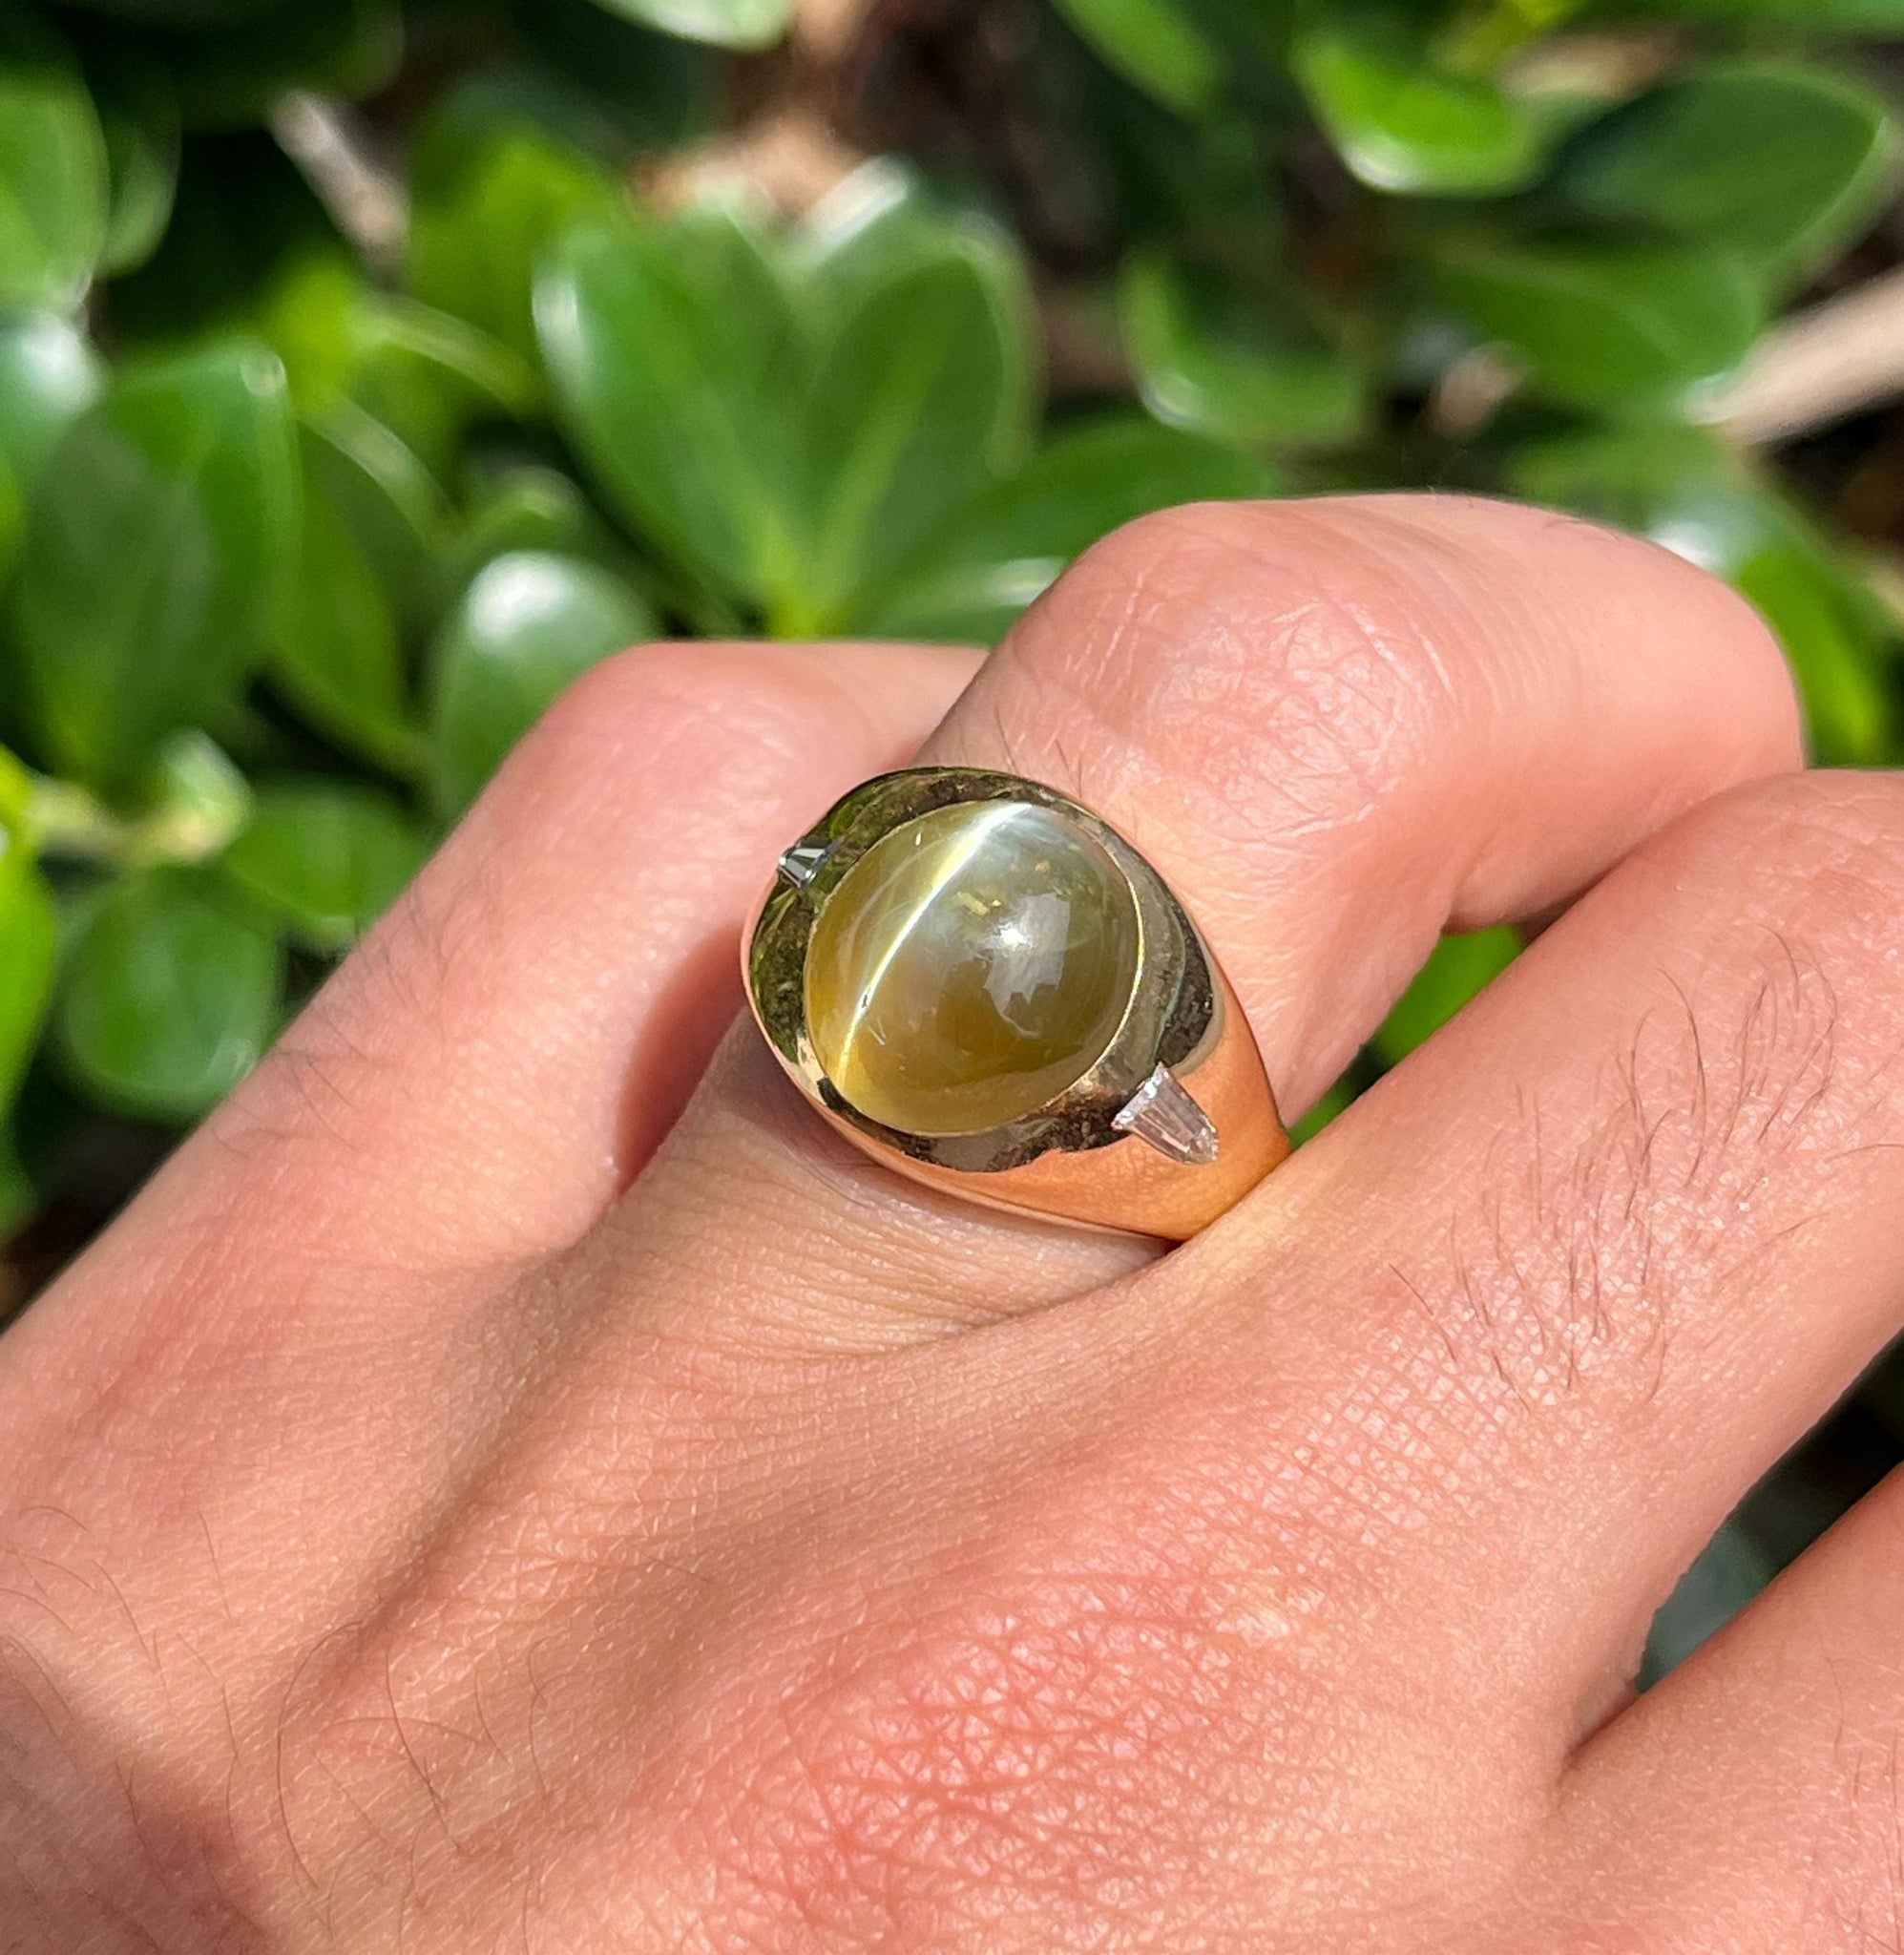 Buy Natural Cat's Eye Ring-cat's Eye Chrysoberyl-cat's Eye Birthstone cat's  Eye Solitaire Ring-925 Sterling Silver-jewelry Handmade-ring-554 Online in  India - Etsy